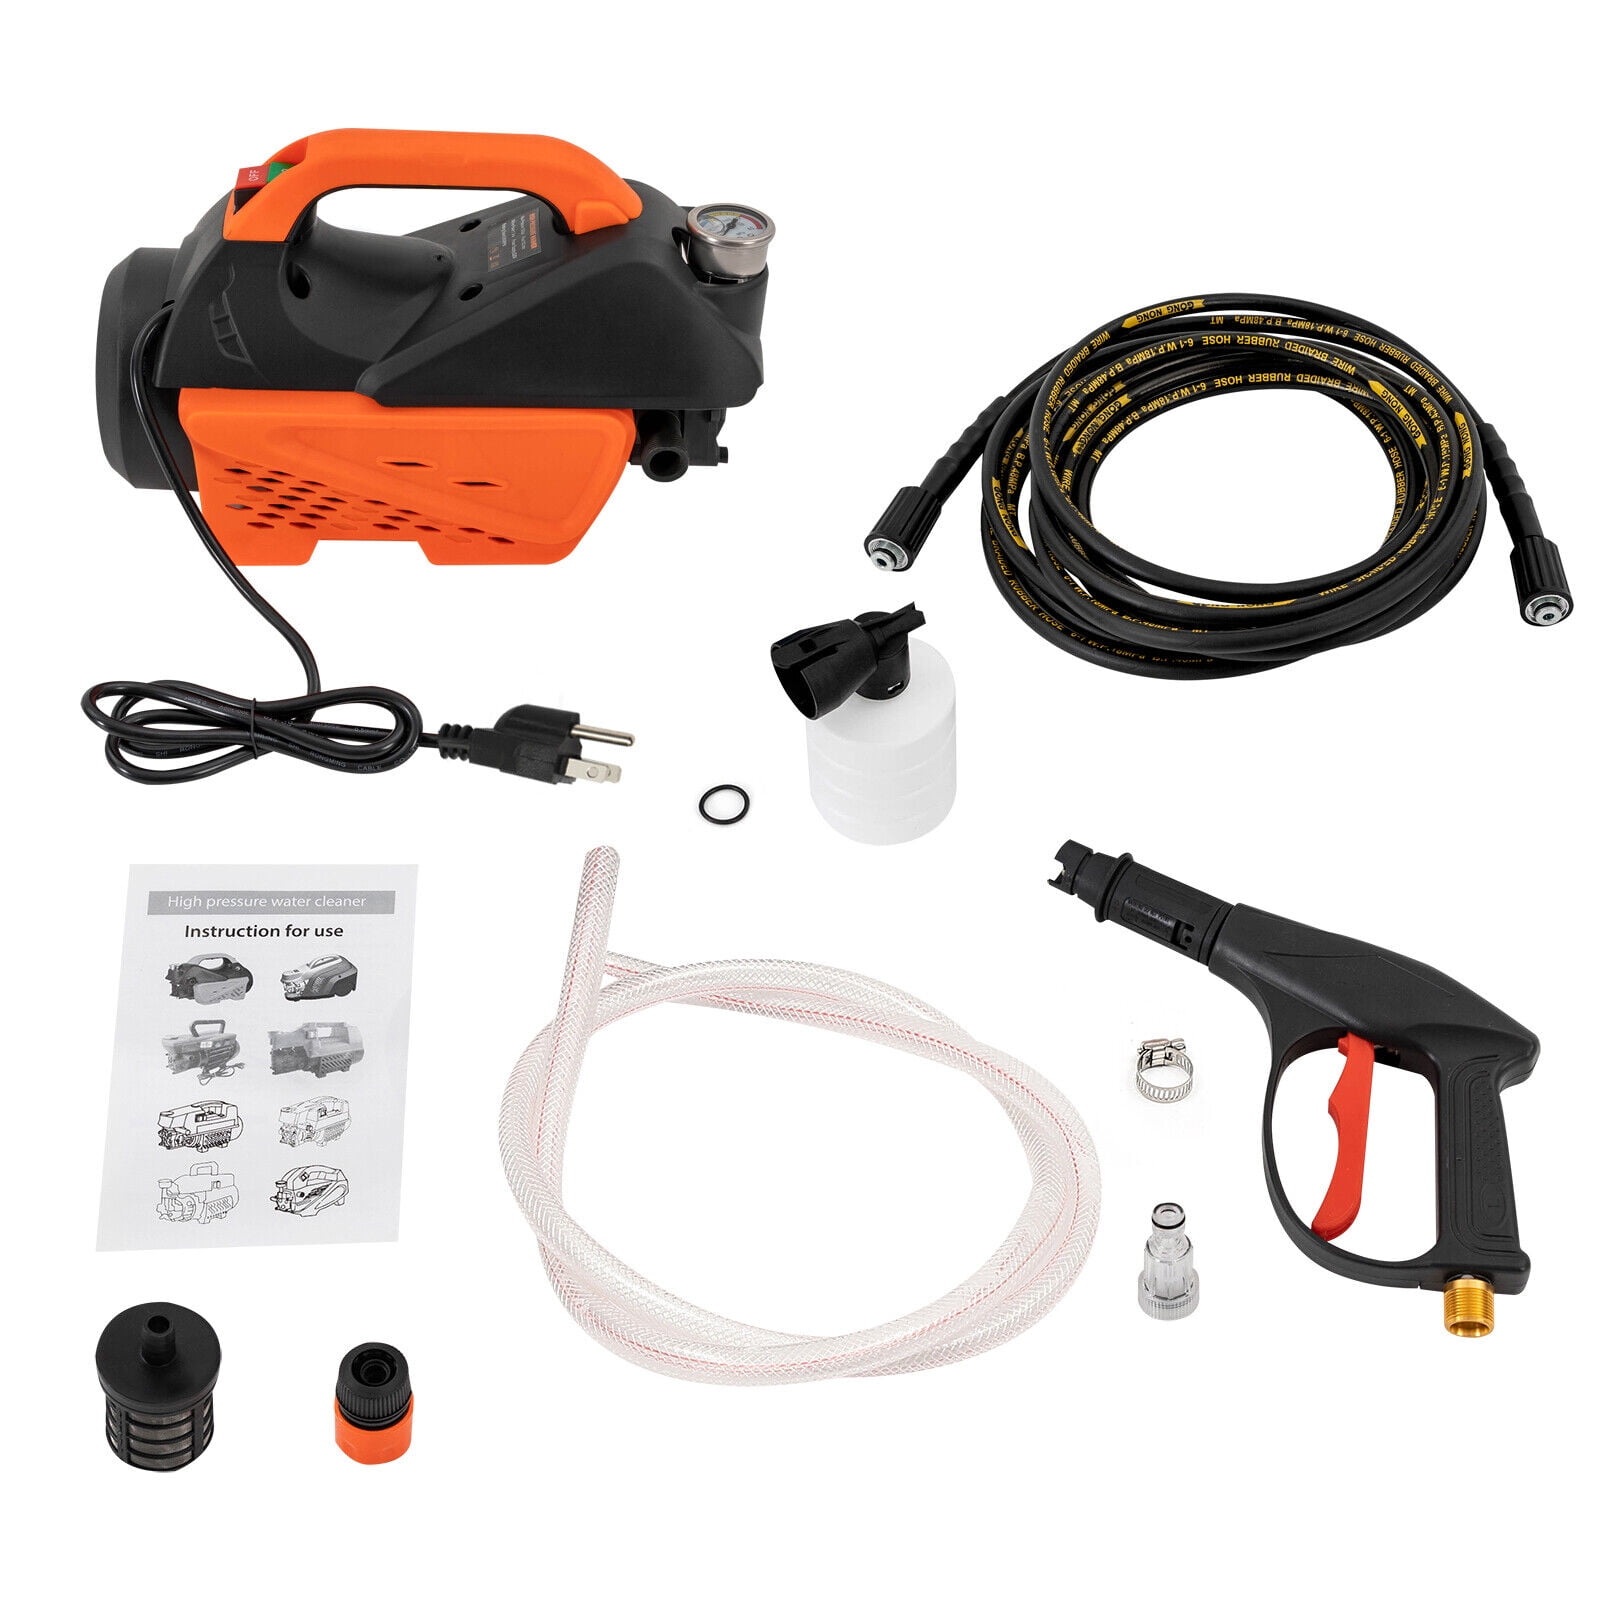 BE X-1520FW1ARH 110Volt 20Amp Electric Pressure Washer Wall Mount Frame  1500psi 2gpm AR Pump